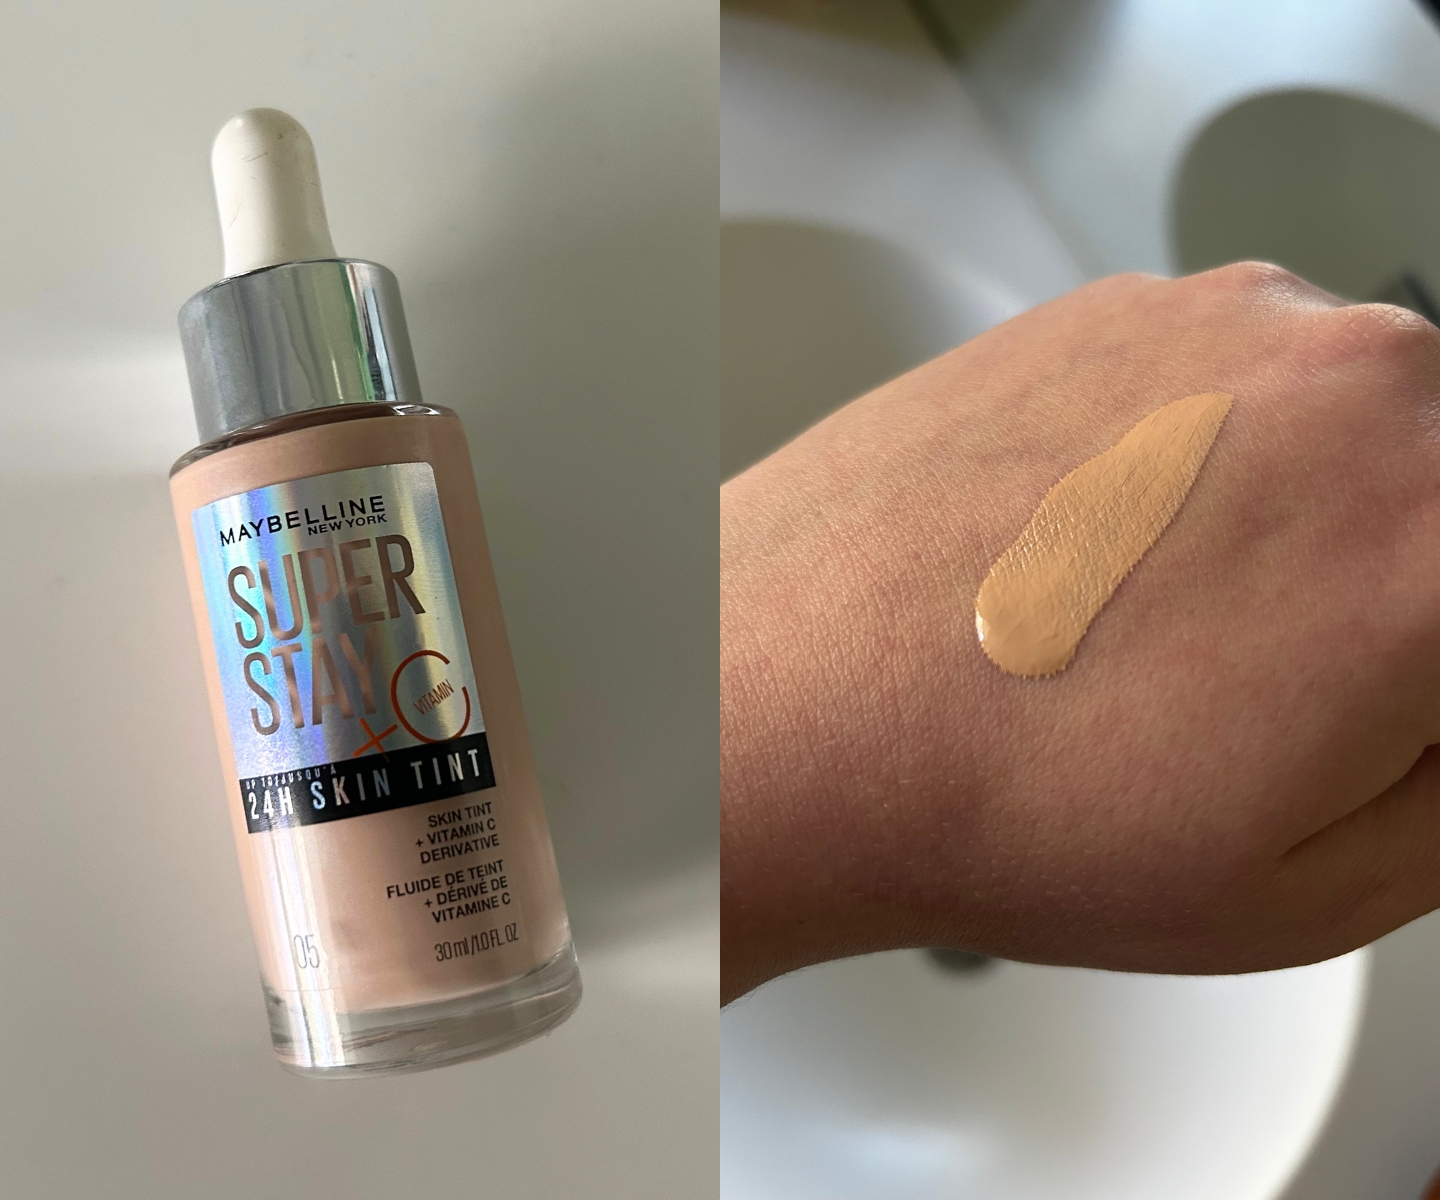 I Tried the Maybelline Superstay Skin Tint Blowing Up My TikTok Feed